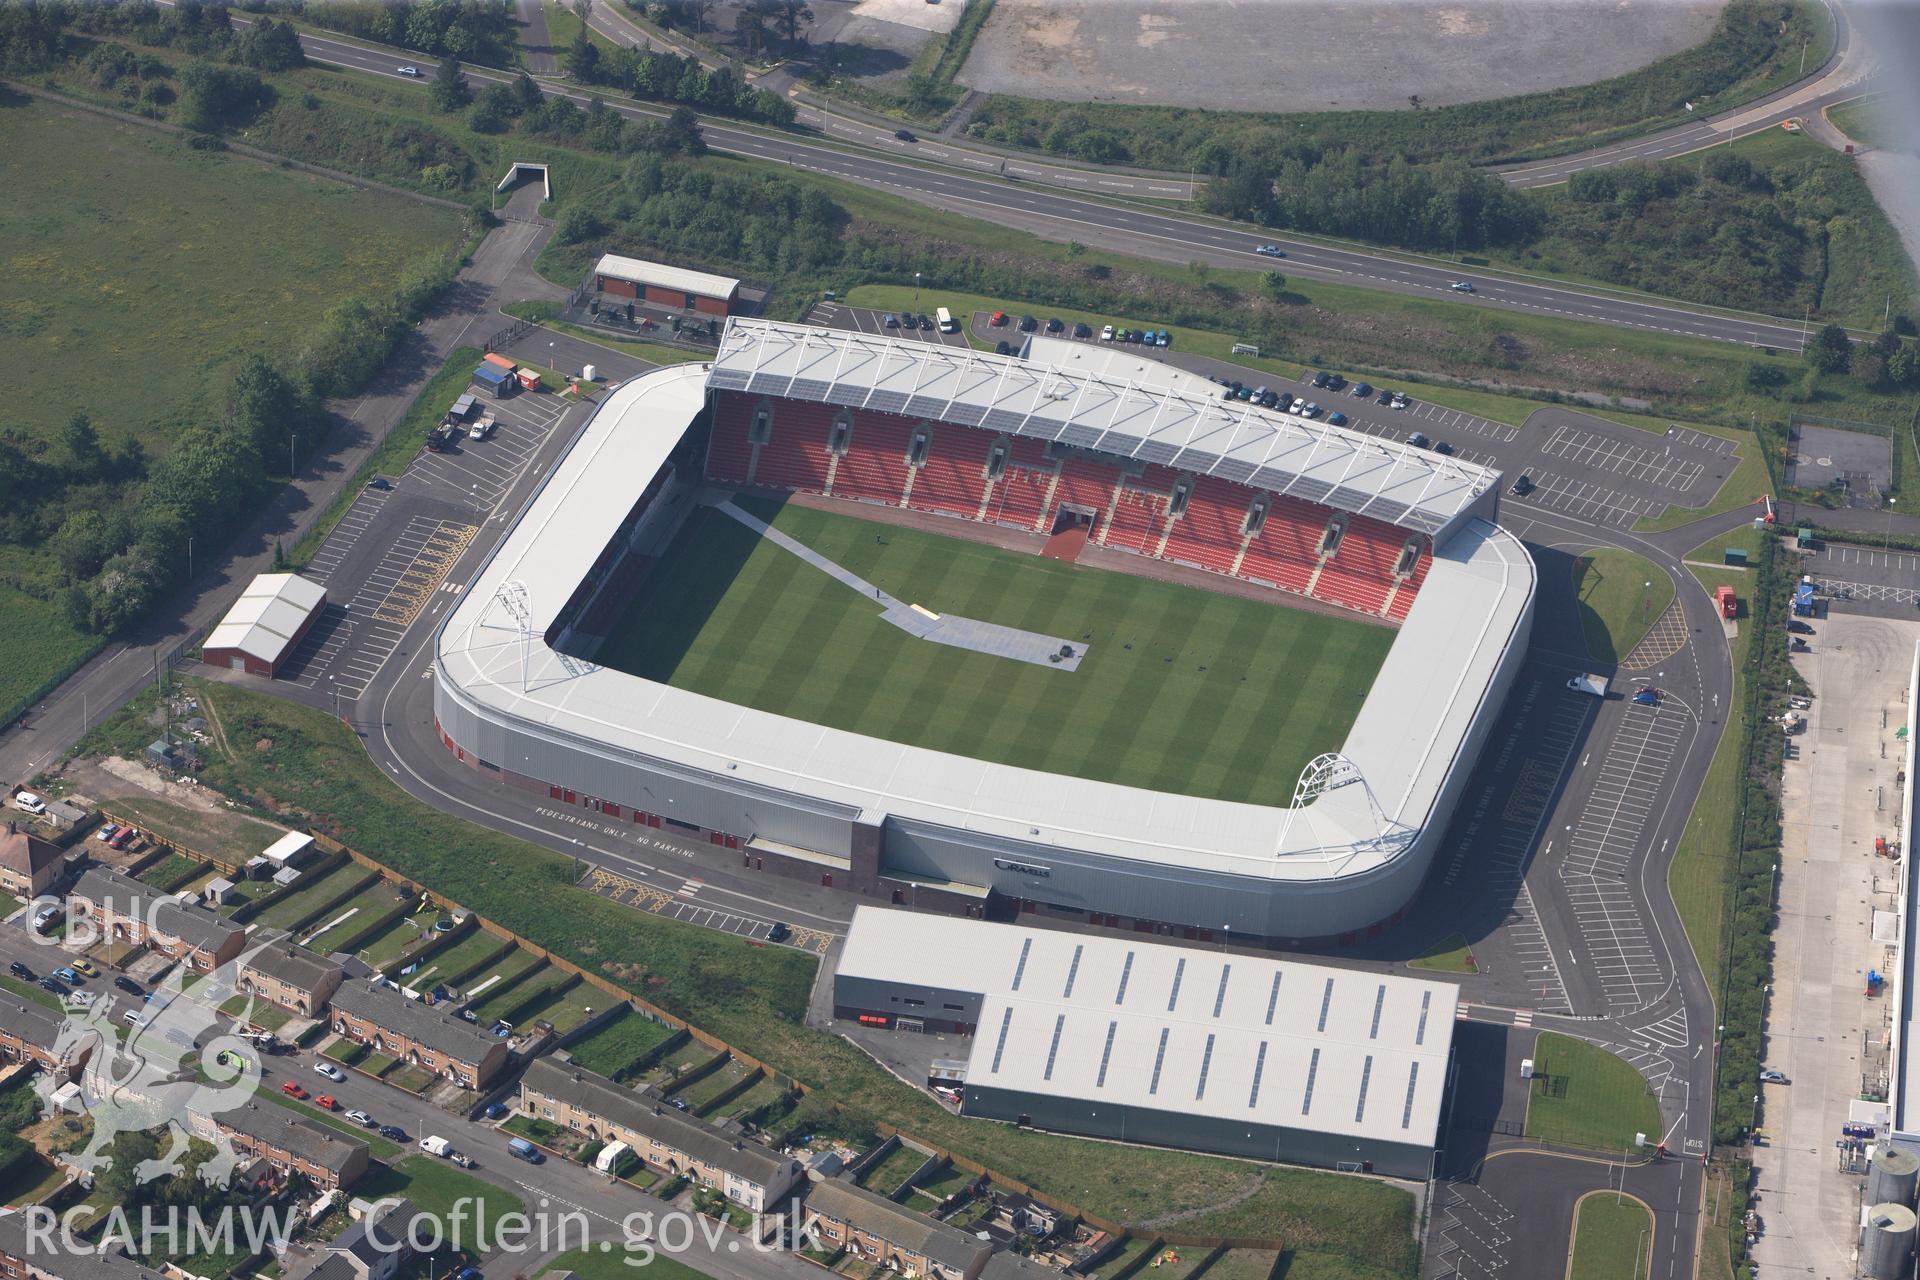 RCAHMW colour oblique photograph of Close view of Parc y Scarlets, looking south west. Taken by Toby Driver on 24/05/2012.